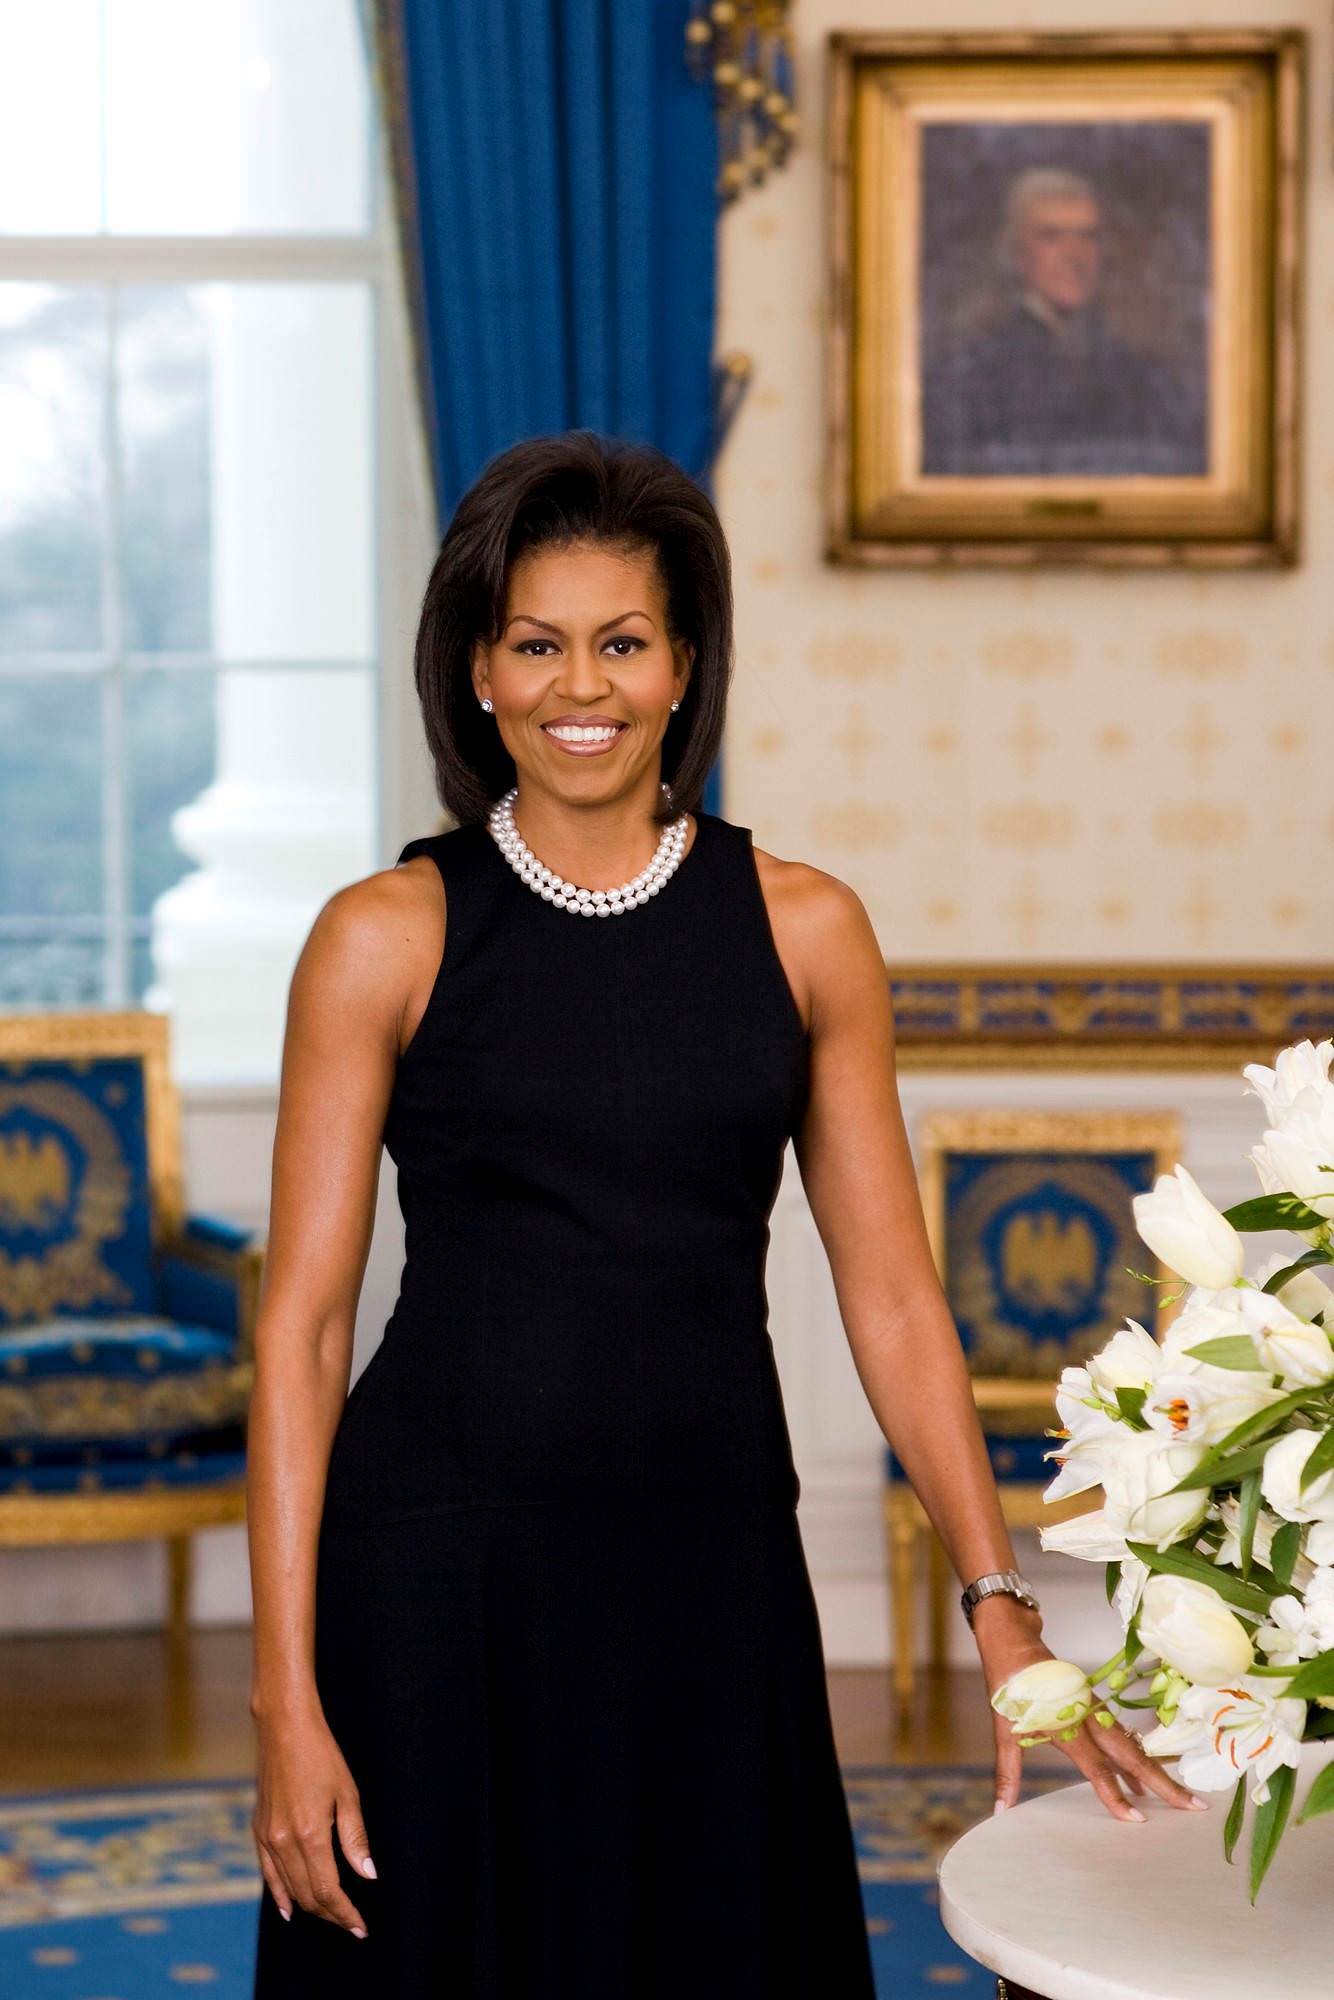 This February 2009 photo released by The White House Feb. 27, 2009, shows the official portrait of first lady Michelle Obama taken in the Blue Room of The White House in Washington. (AP Photo/The White House, Joynce N. Boghosian)